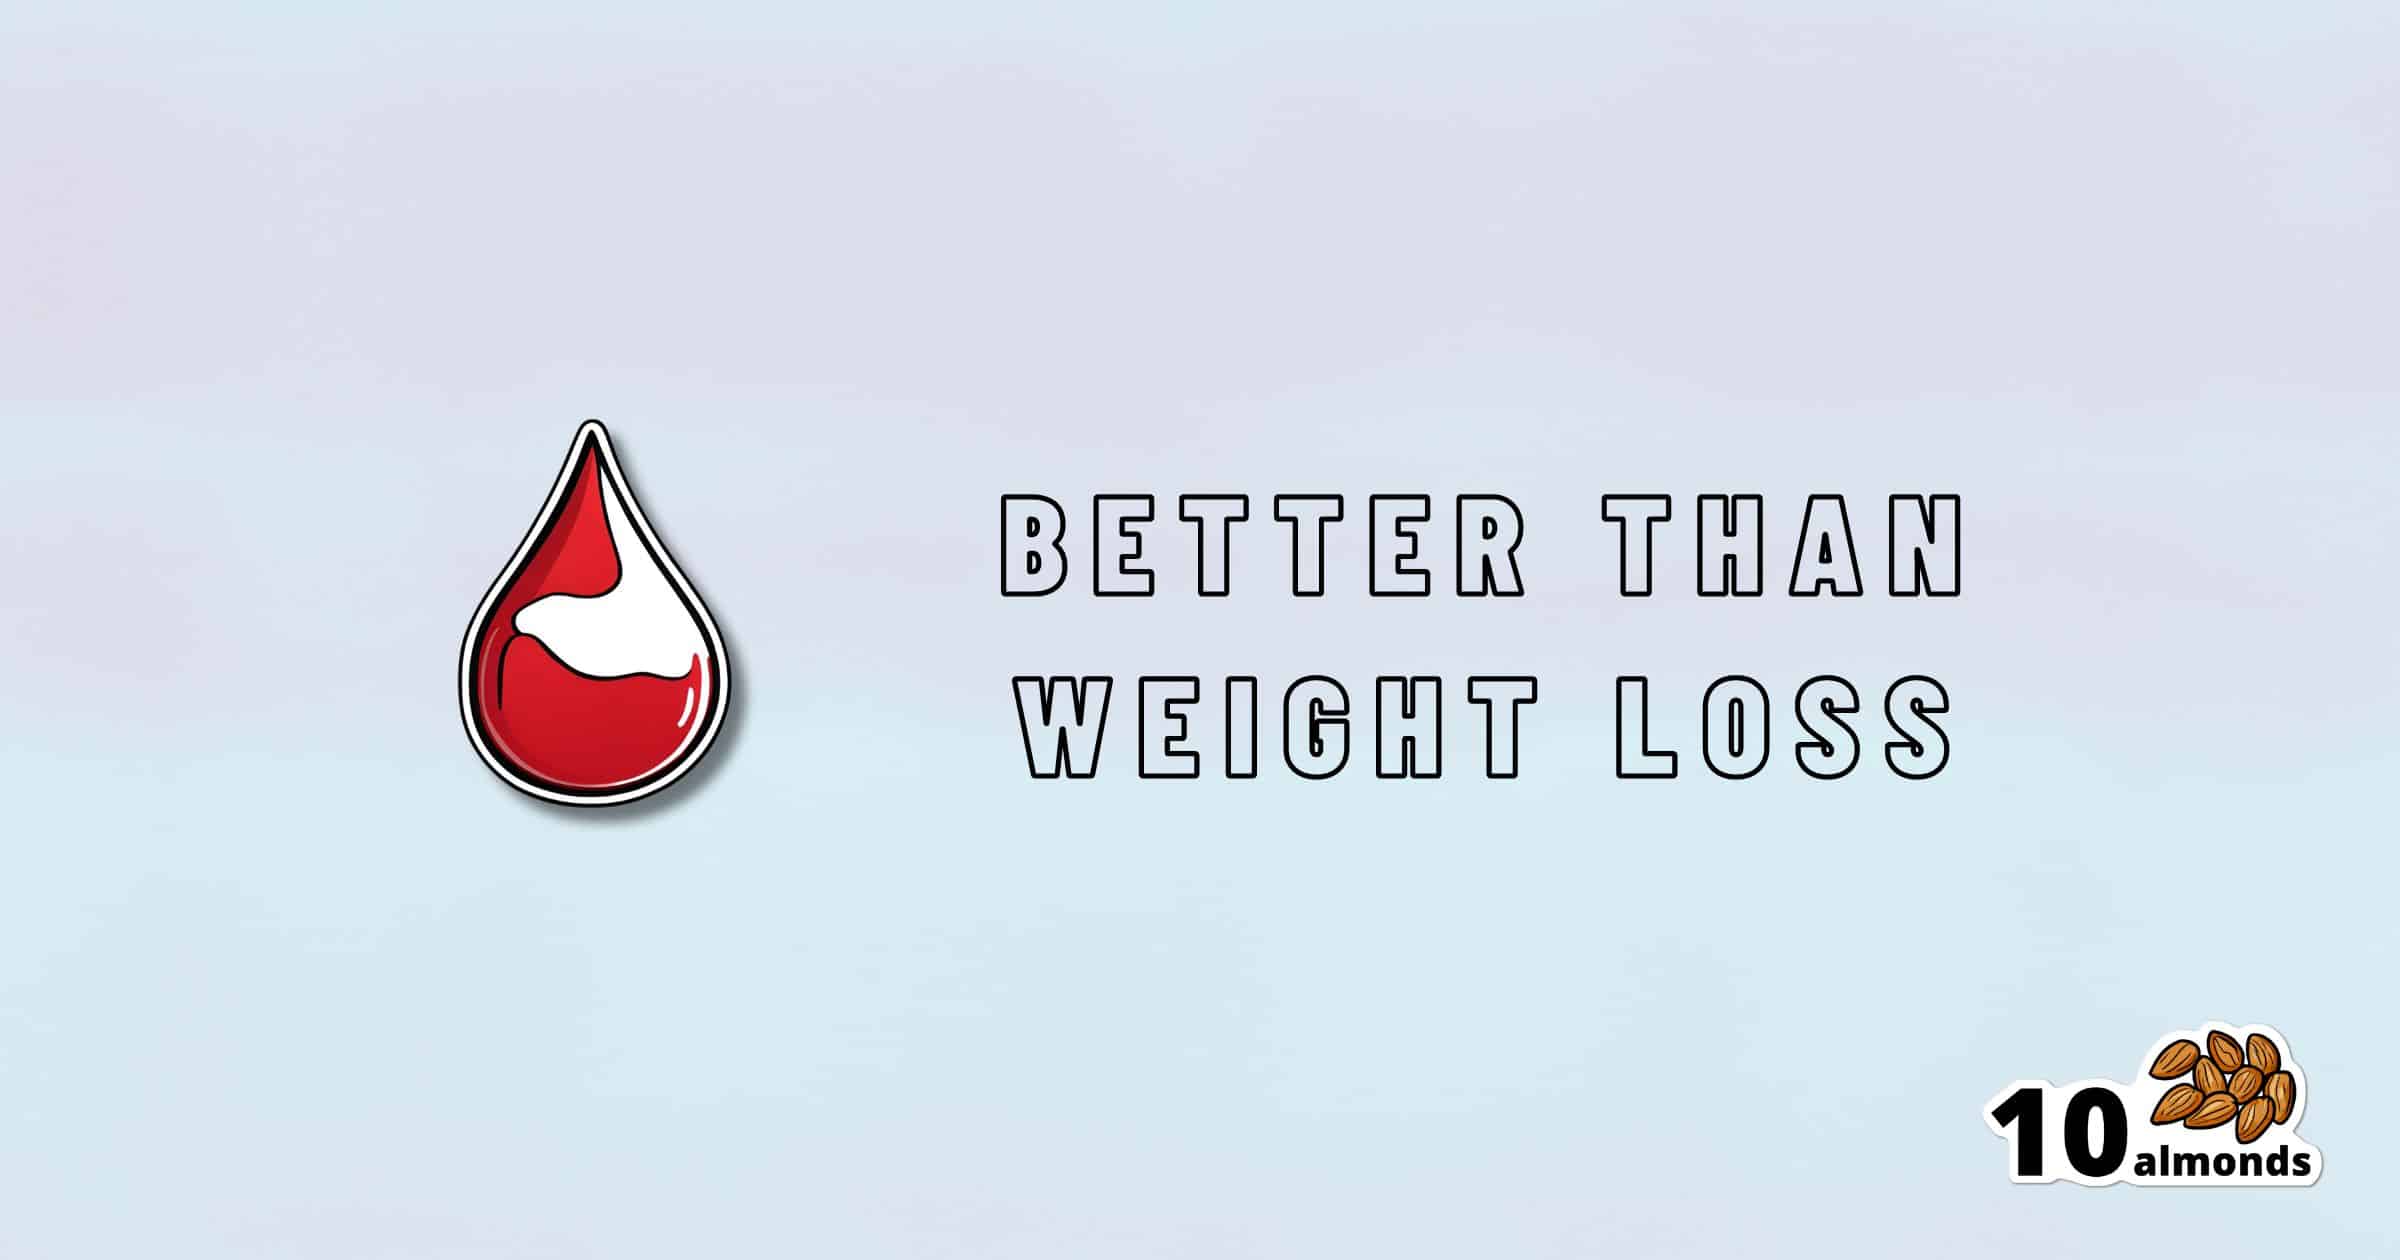 A graphic with a blood drop icon and the text "Better Than Weight Loss." In the bottom right corner, there is an illustration of 10 almonds accompanied by the text "10 almonds." The background features a pale gradient from light blue to white, subtly suggesting alternative weight loss methods.